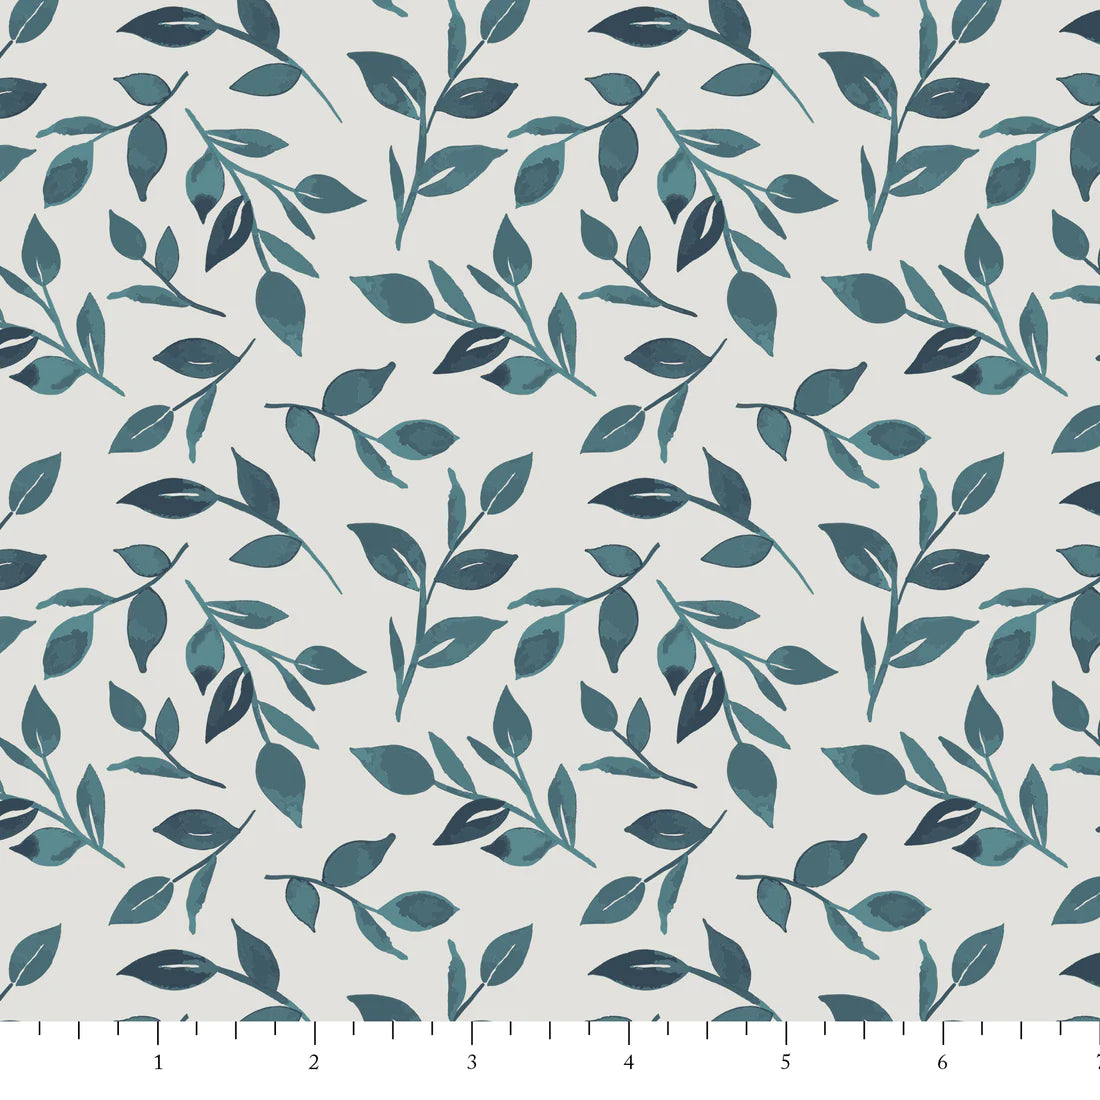 Birds and Bloom Quilt Fabric - Leafy Stems in Gray/Blue - PH0164